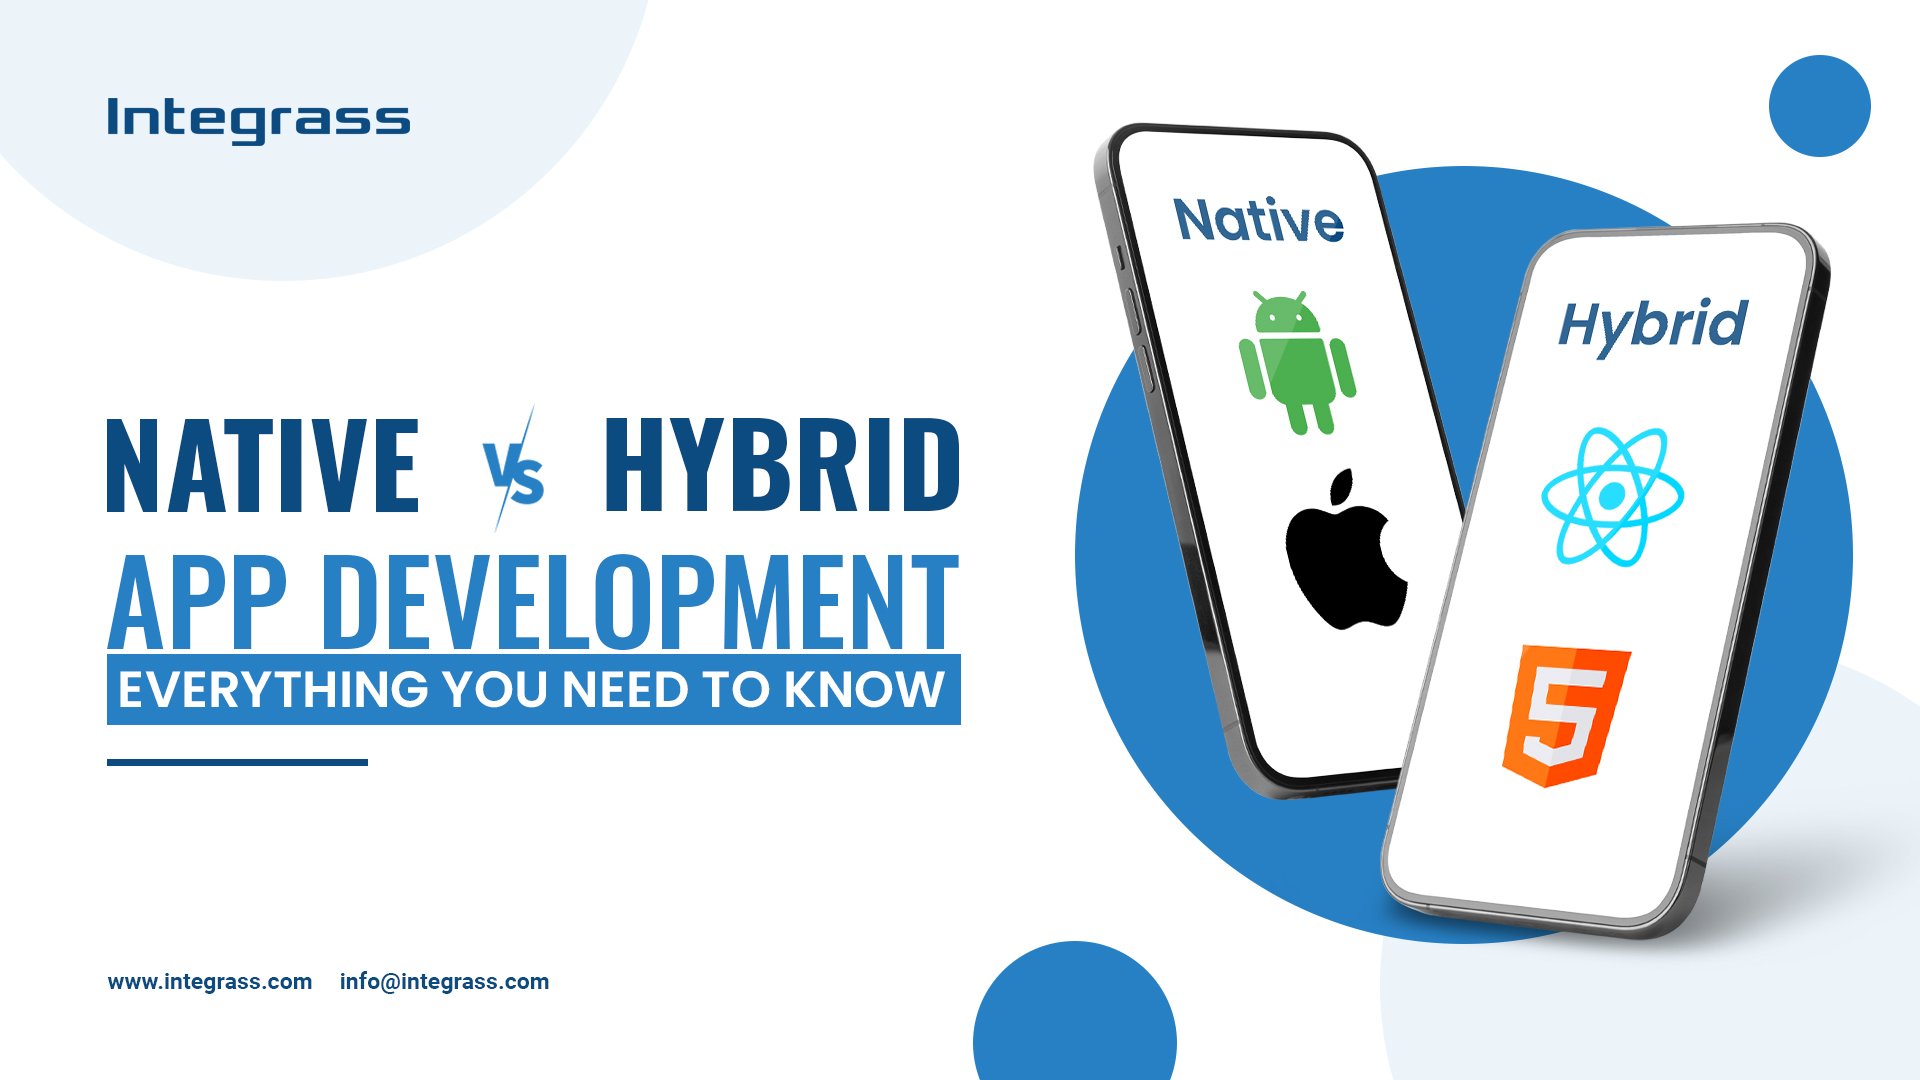 Native vs hybrid app development: insights from a top US mobile app development company to help you choose the right approach for your business.